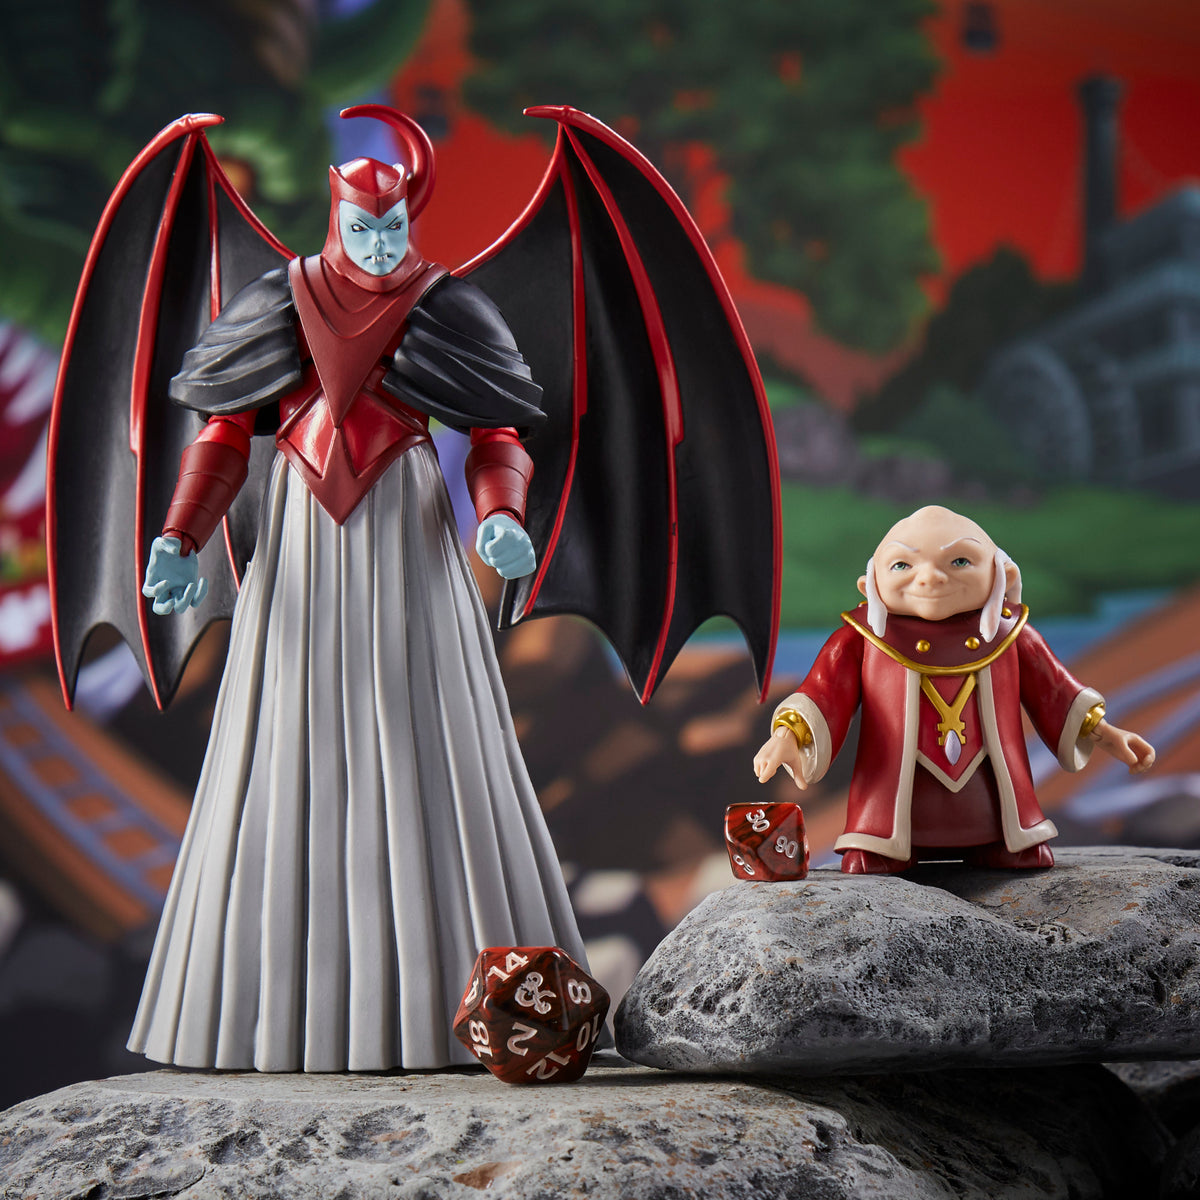 How to watch and stream Dungeons & Dragons Cartoon Classics Hank Diana  Bobby Venger Dungeon Master Hasbro Figure Review - 2023 on Roku